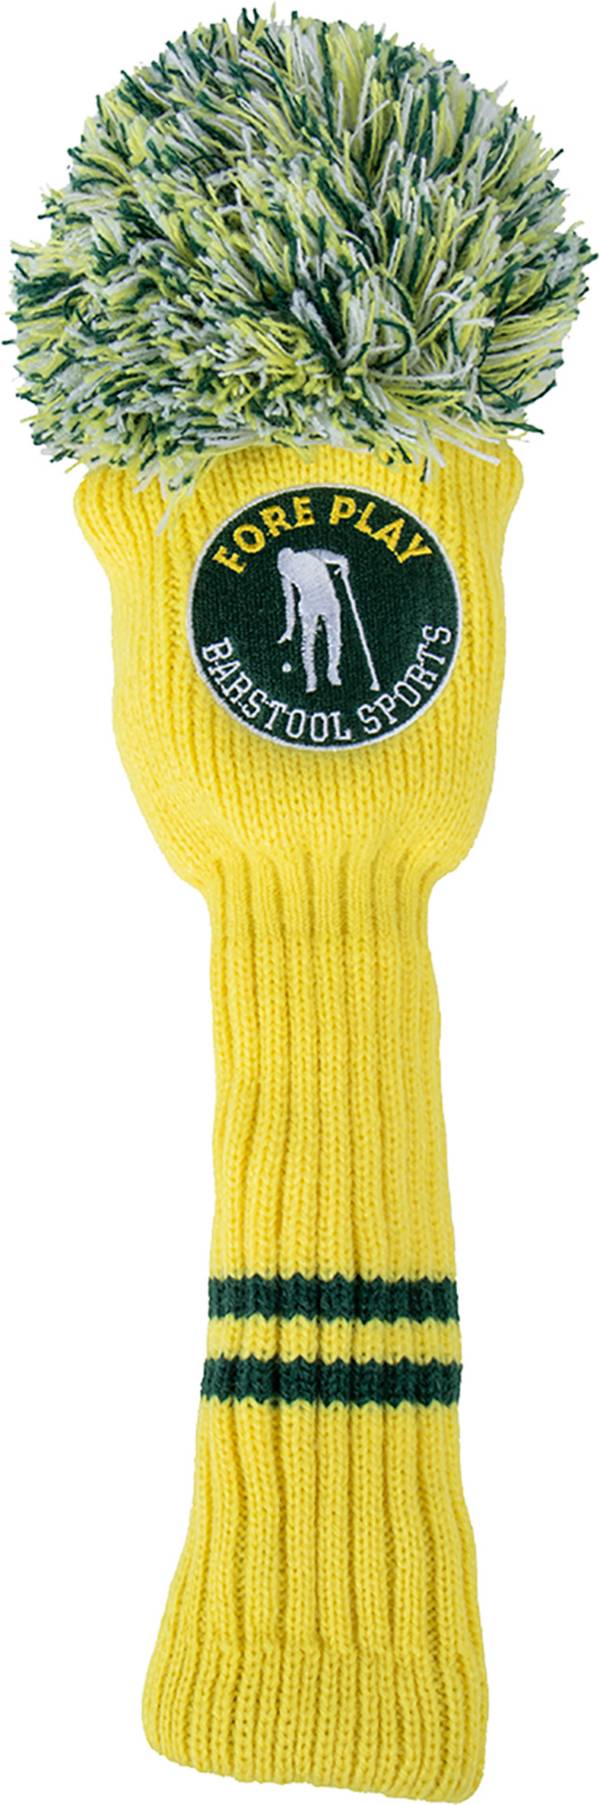 Barstool Sports Fore Play Knit Fairway Wood Headcover product image